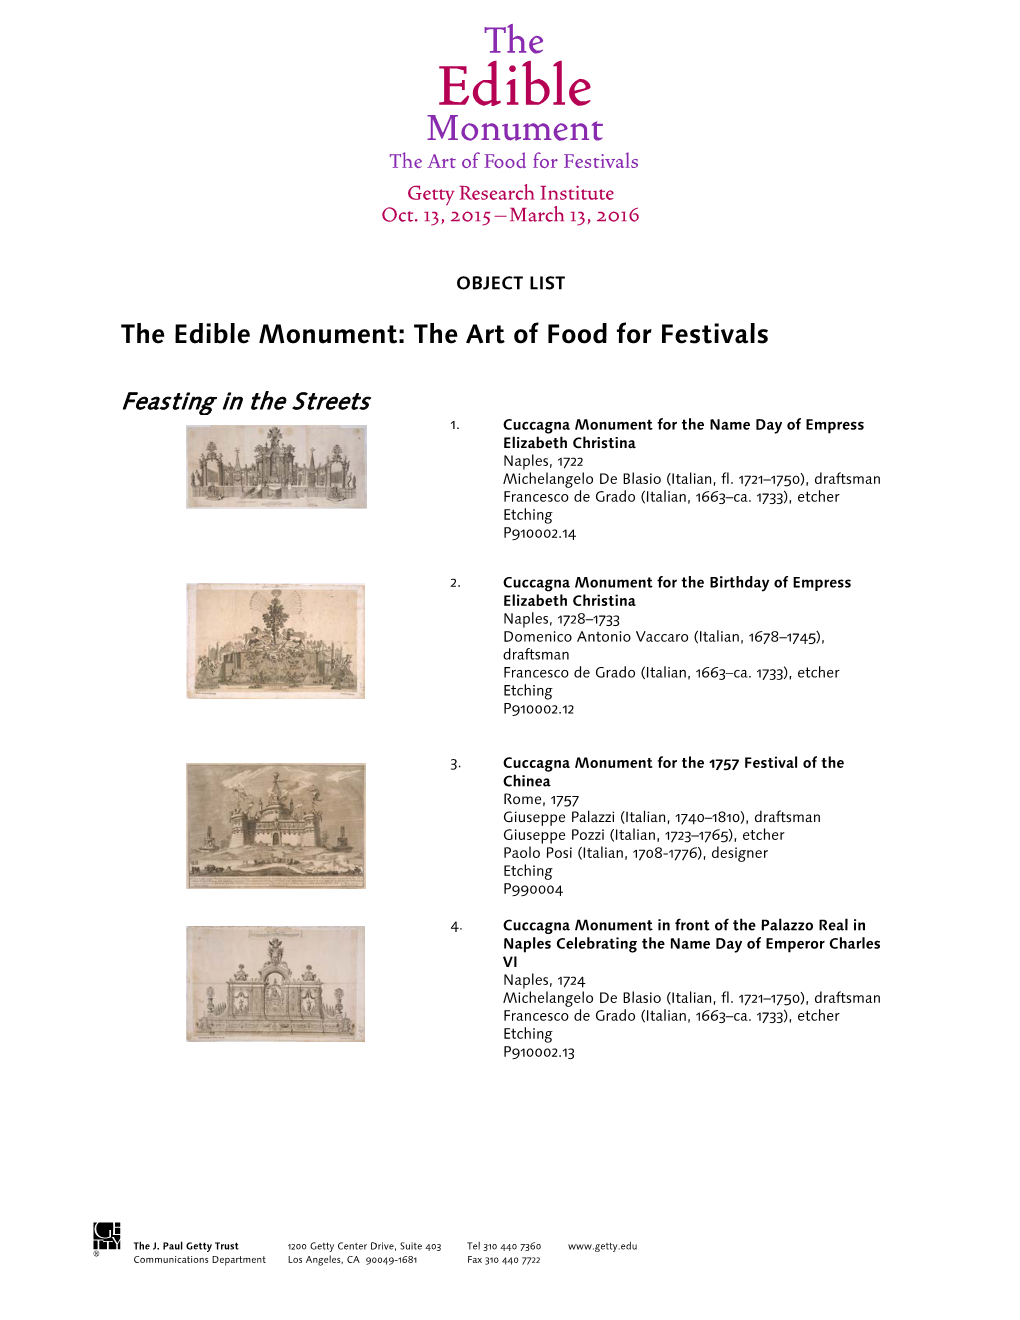 The Edible Monument: the Art of Food for Festivals